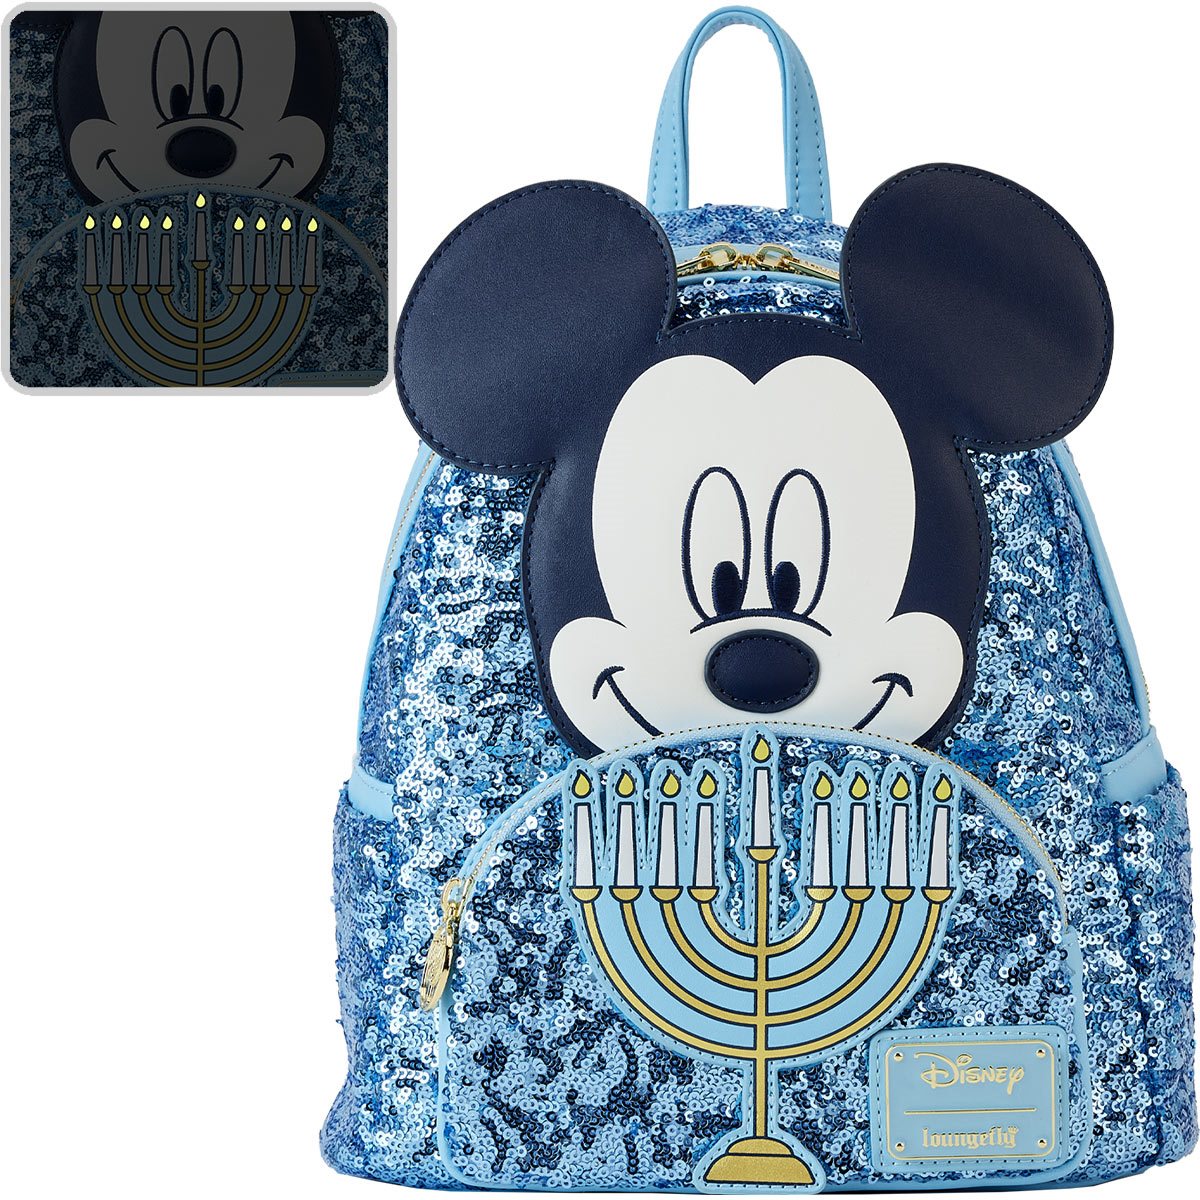 Loungefly Entertainment Earth Exclusive Disney Wish Star Glow-in-the-Dark  Mini-Backpack